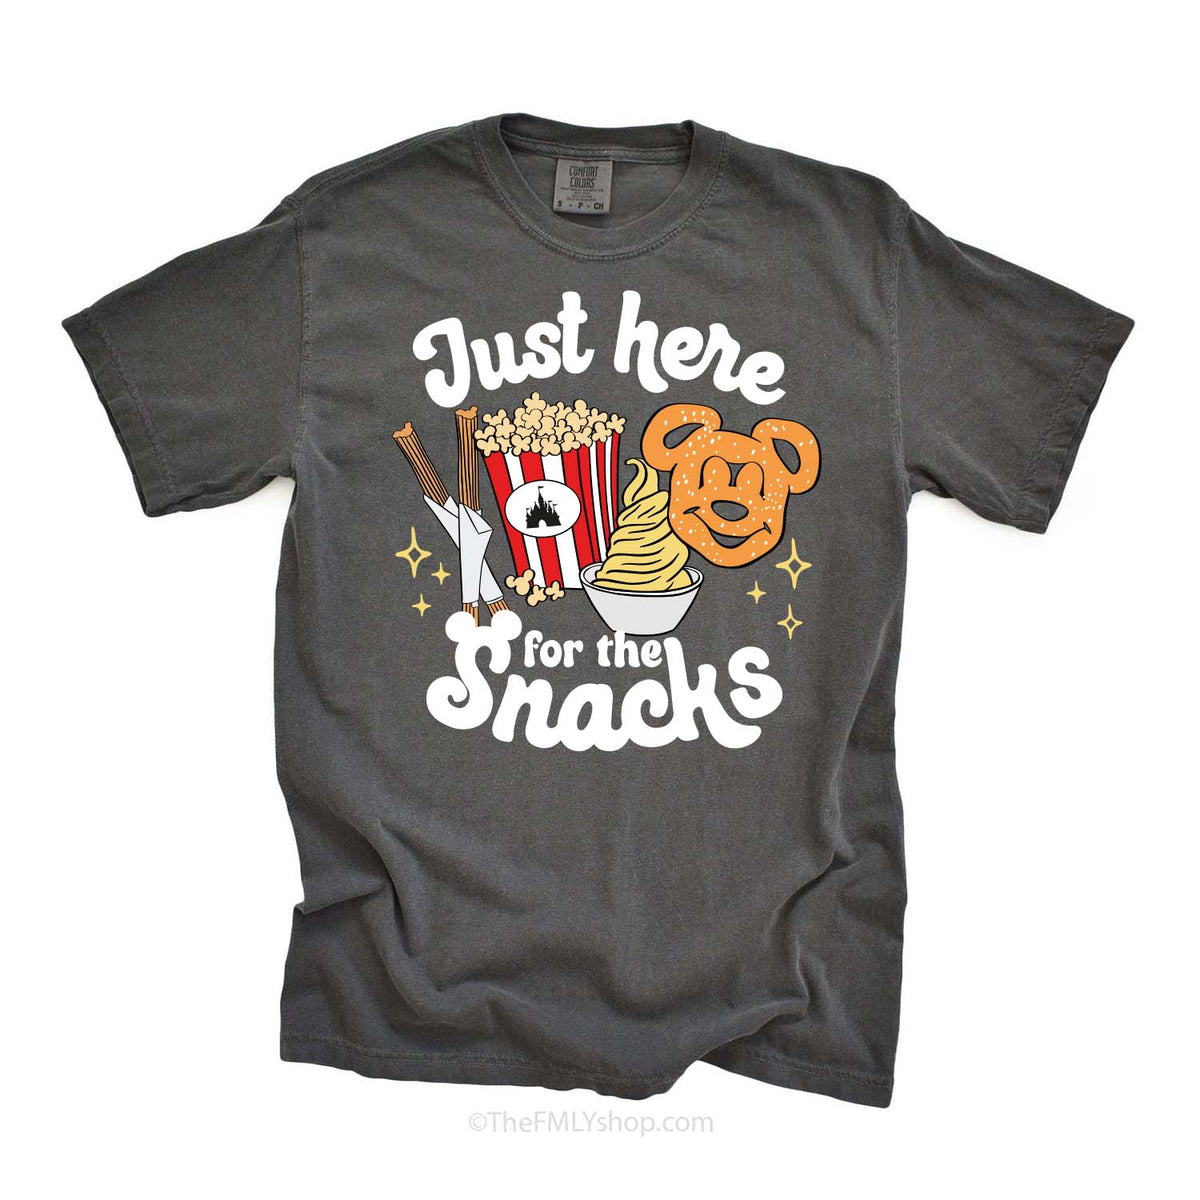 Just here for the Snacks Tee